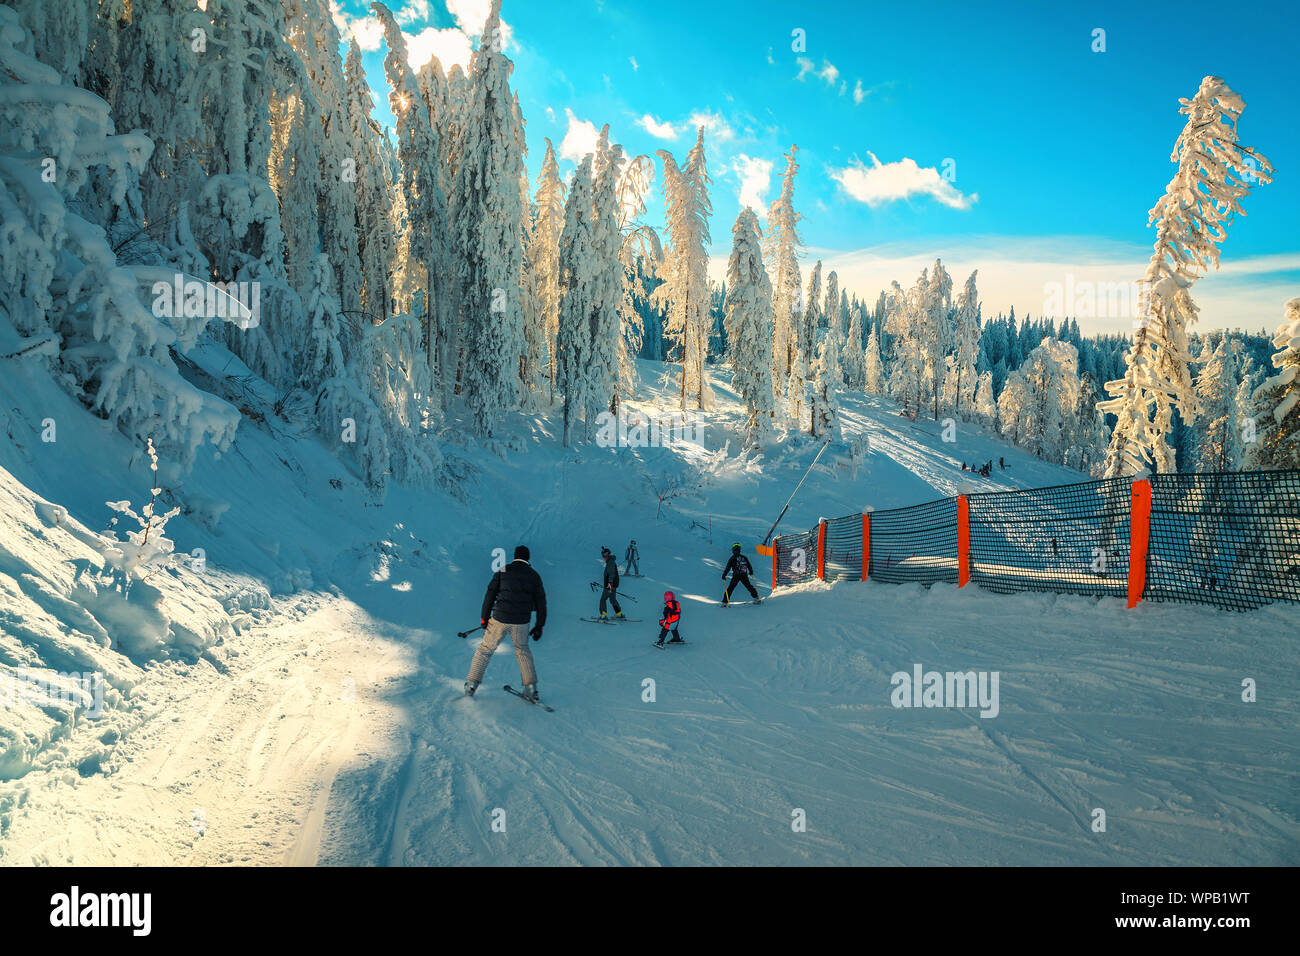 Popular winter ski resort with frozen trees and landscape. Active skiers skiing downhill and enjoying the nature, Poiana Brasov, Carpathians, Transylv Stock Photo